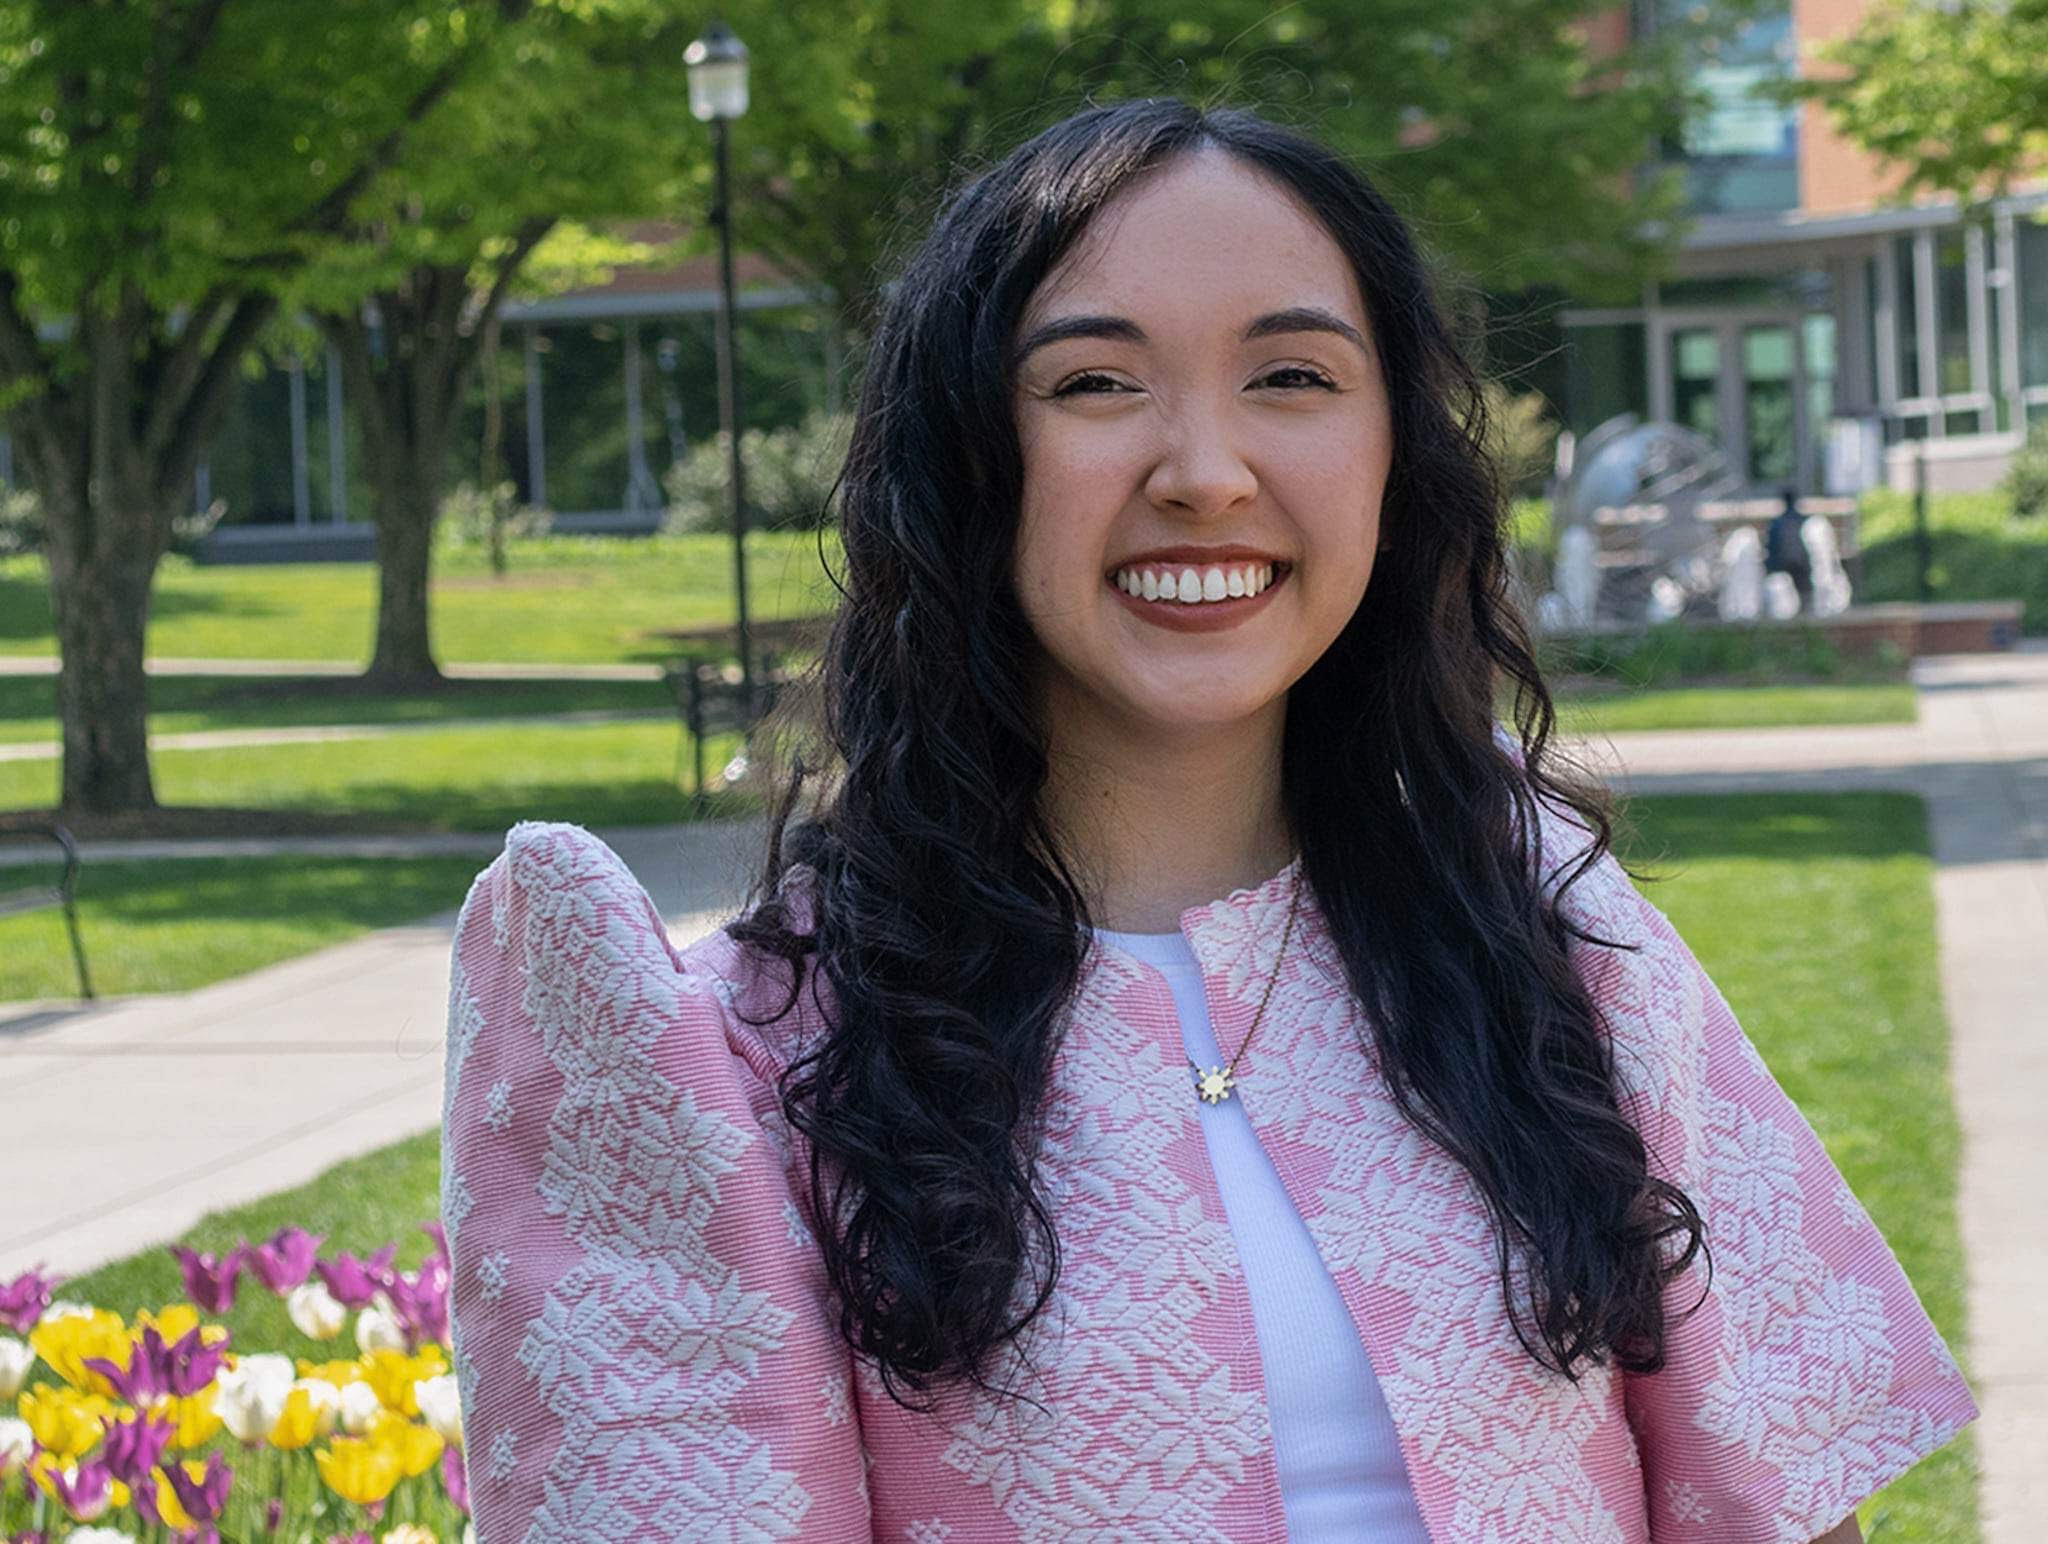 April is standing outside in Vartan Plaza at Penn State Harrisburg. She has curly, dark brown hair and is wearing a pink and white woven bolero, a white shirt, and a gold Philippine sun necklace. Yellow, white and purple tulips are in full bloom.